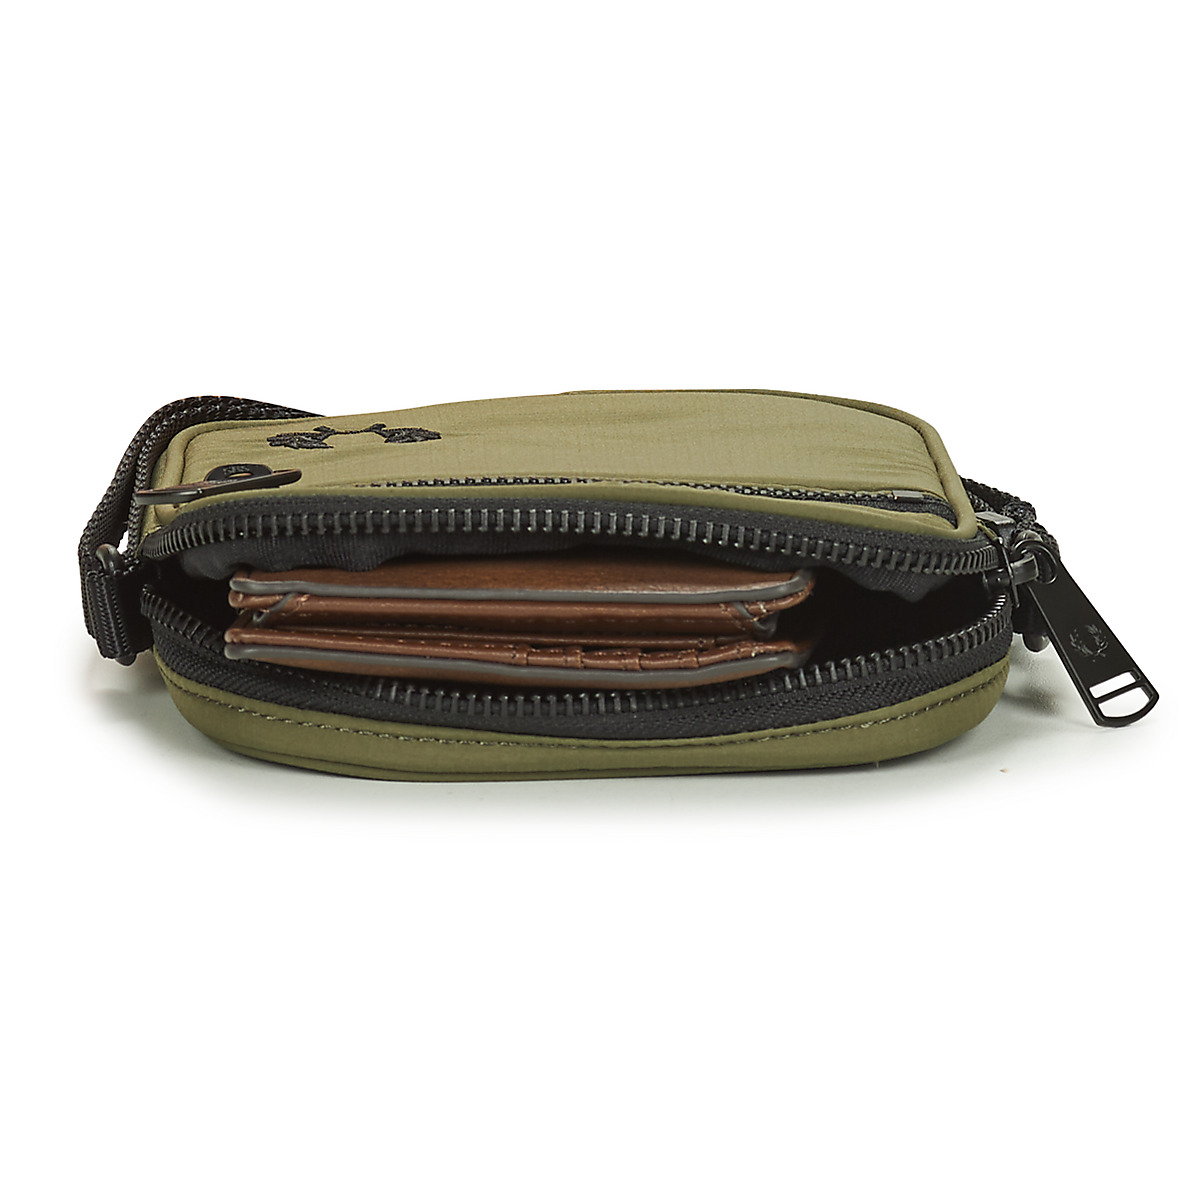 Fred Perry UNIFORM GREEN RIPSTOP SIDE BAG 275qMIml